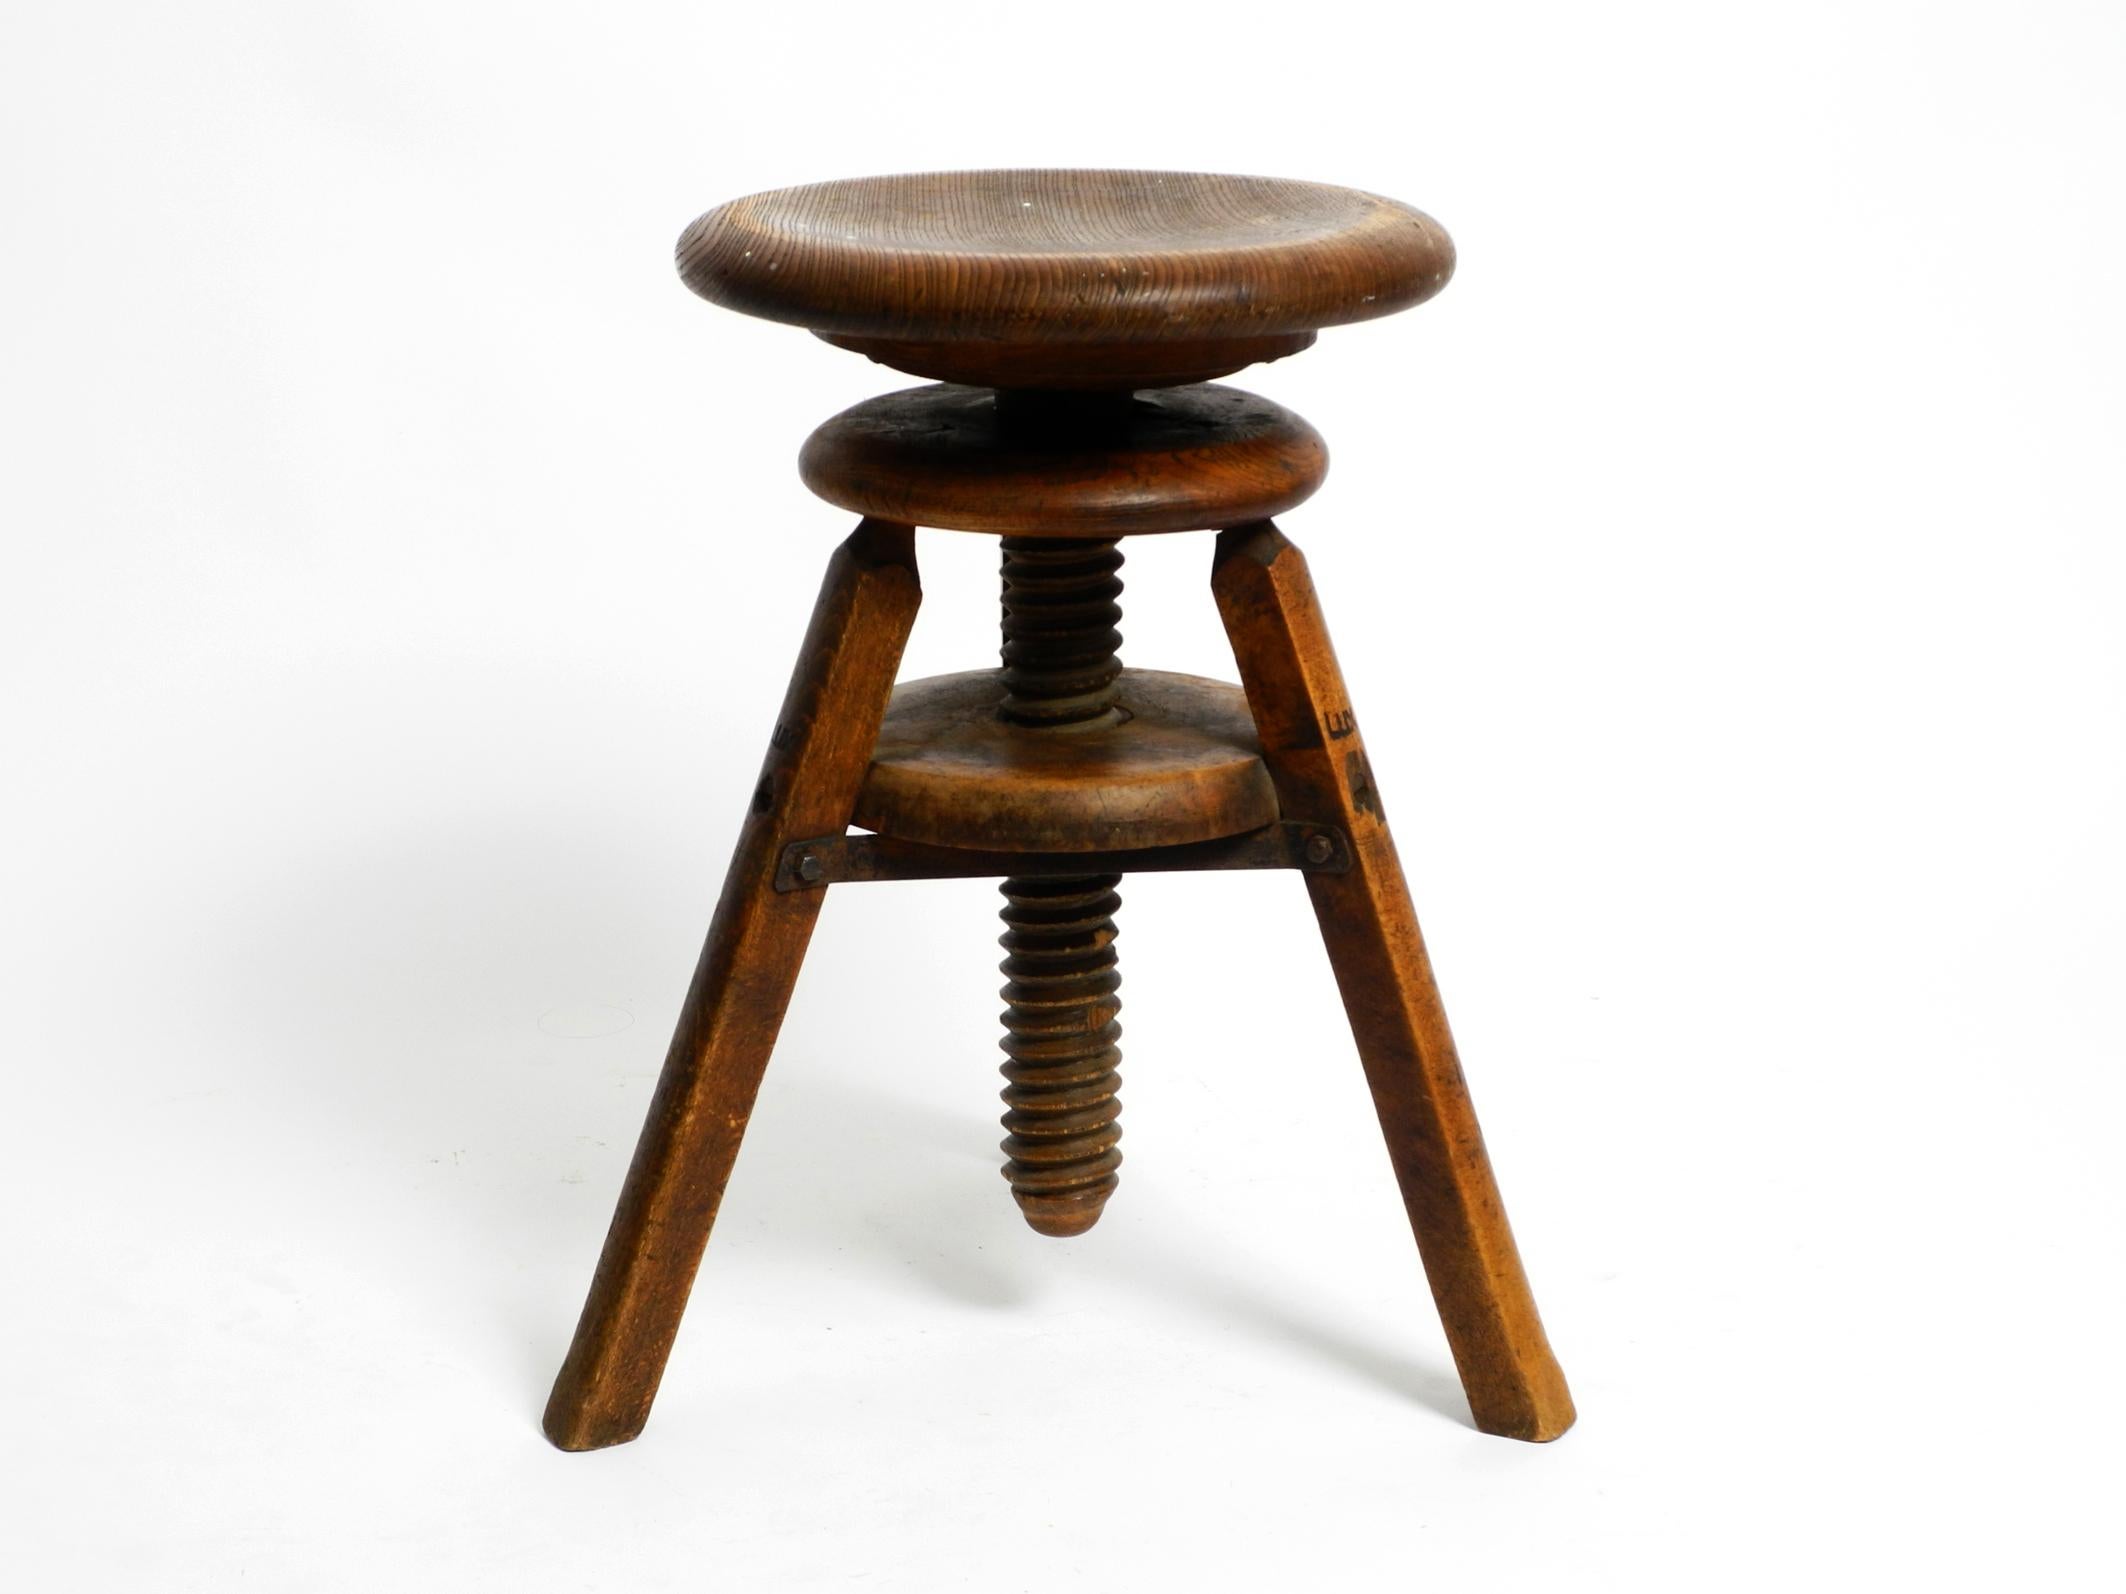 Original 1930s industrial oak swivel stool.
Heavy and solid design. Built to last. Made in France.
Great design and function. Fantastic patina from the last 90 years.
The rotating mechanism works perfectly. Holds at any seat height.
You can see some